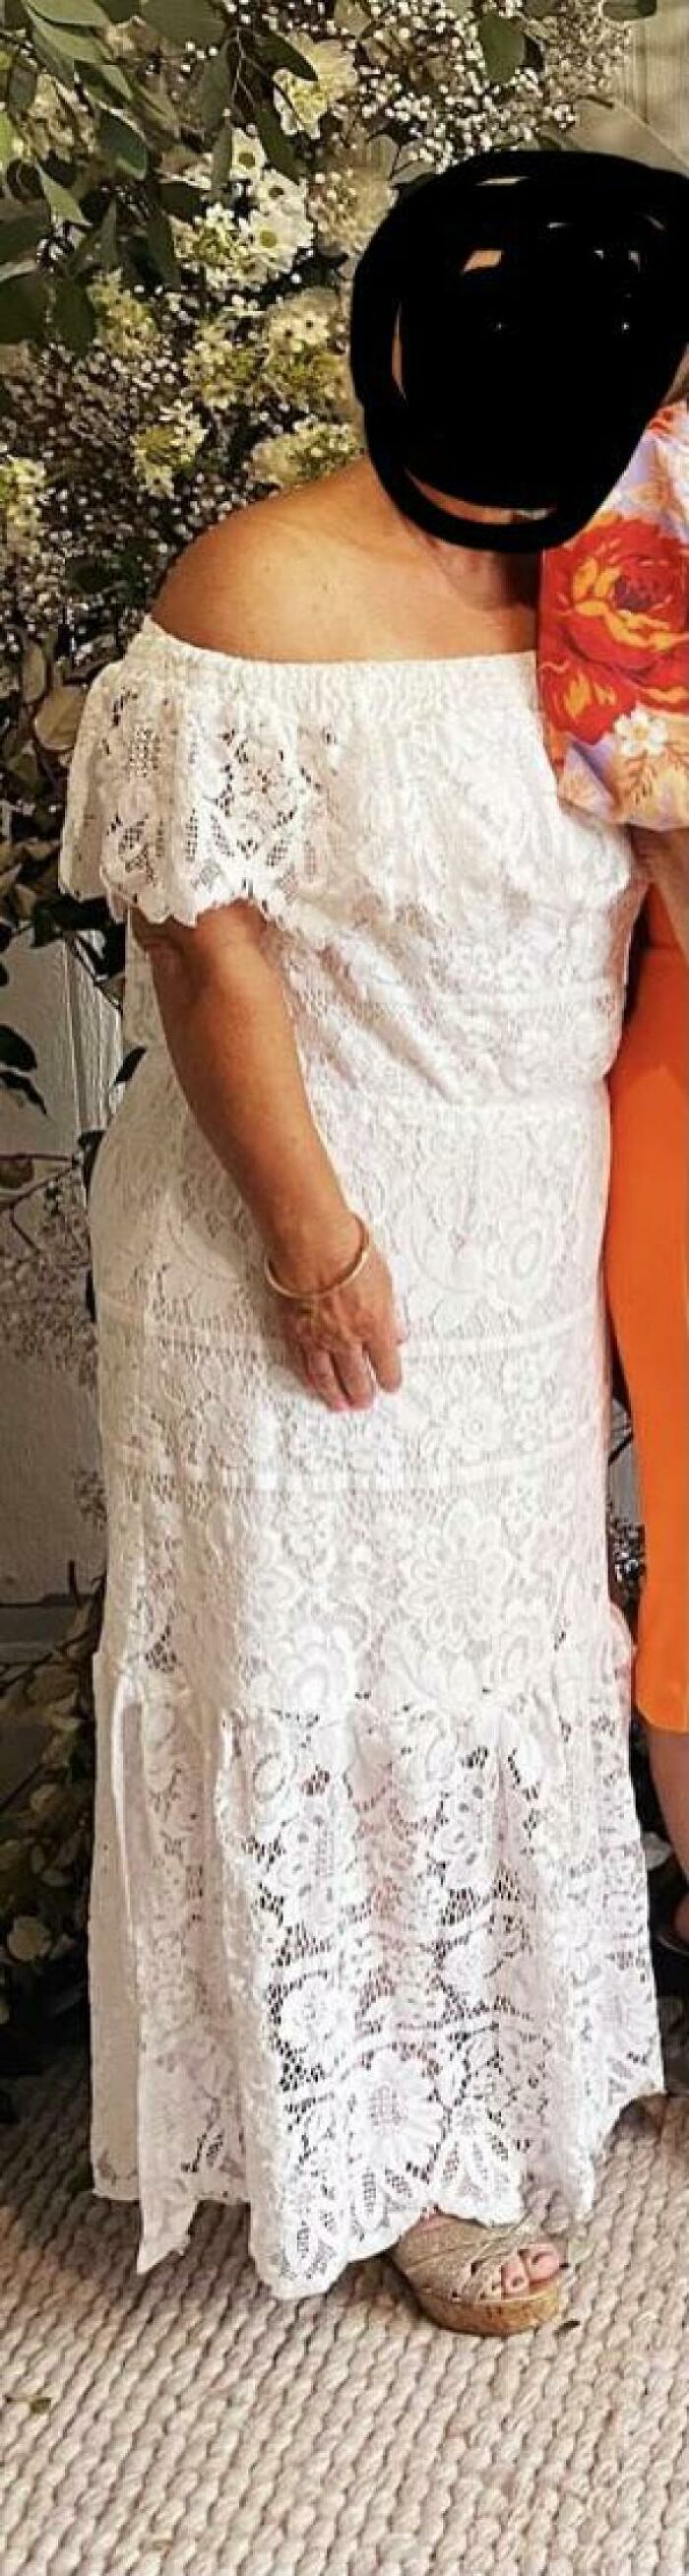 Aunt Of The Bride Wore This To A Wedding...